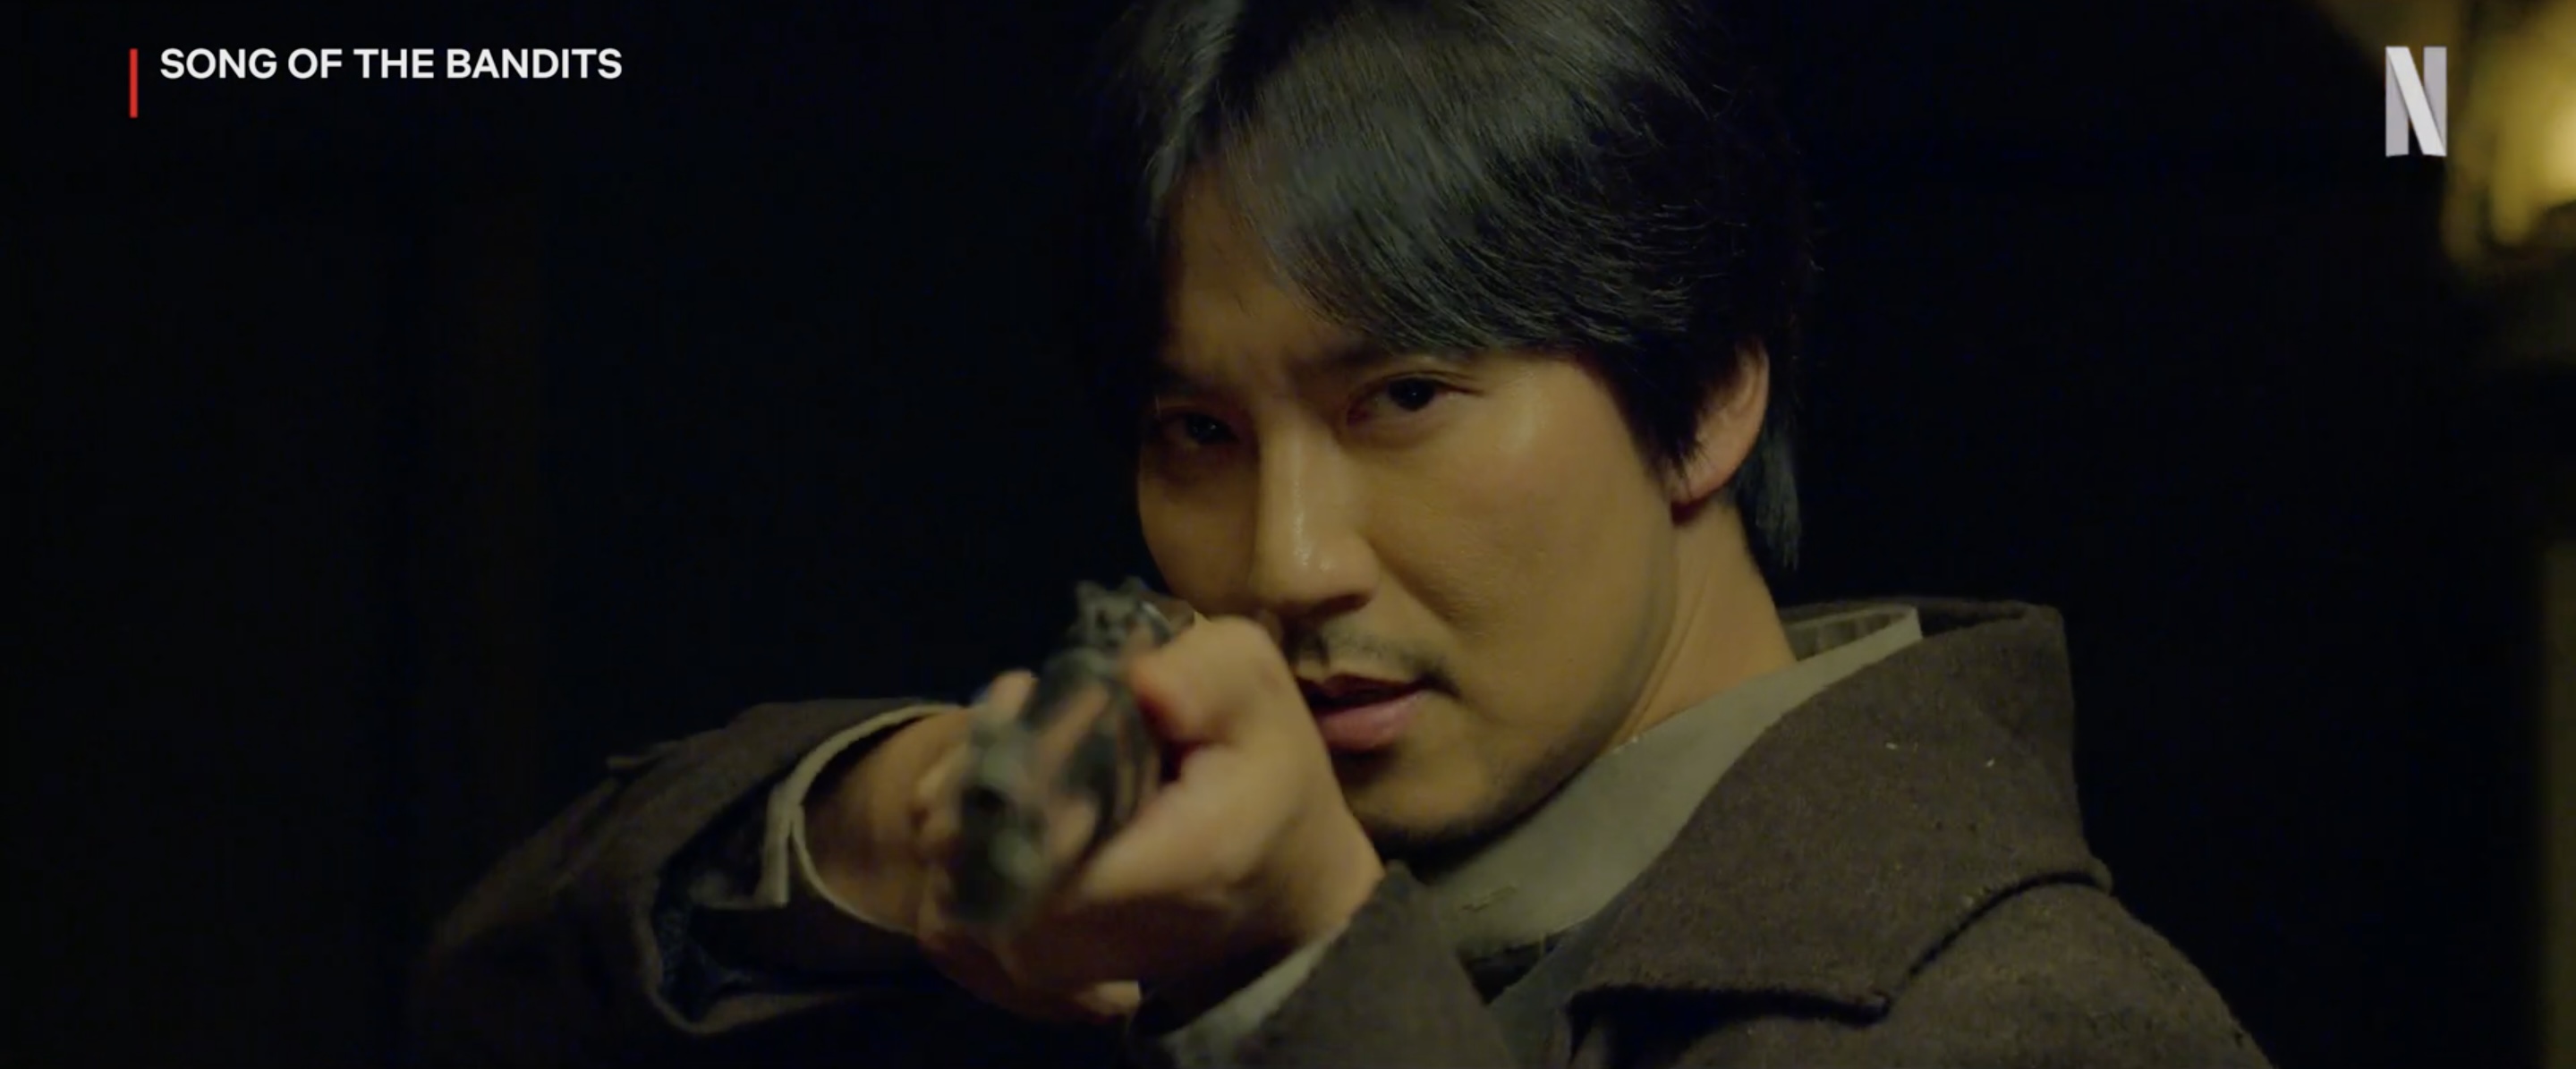 Kim Nam-gil fights for freedom in Song of the Bandits